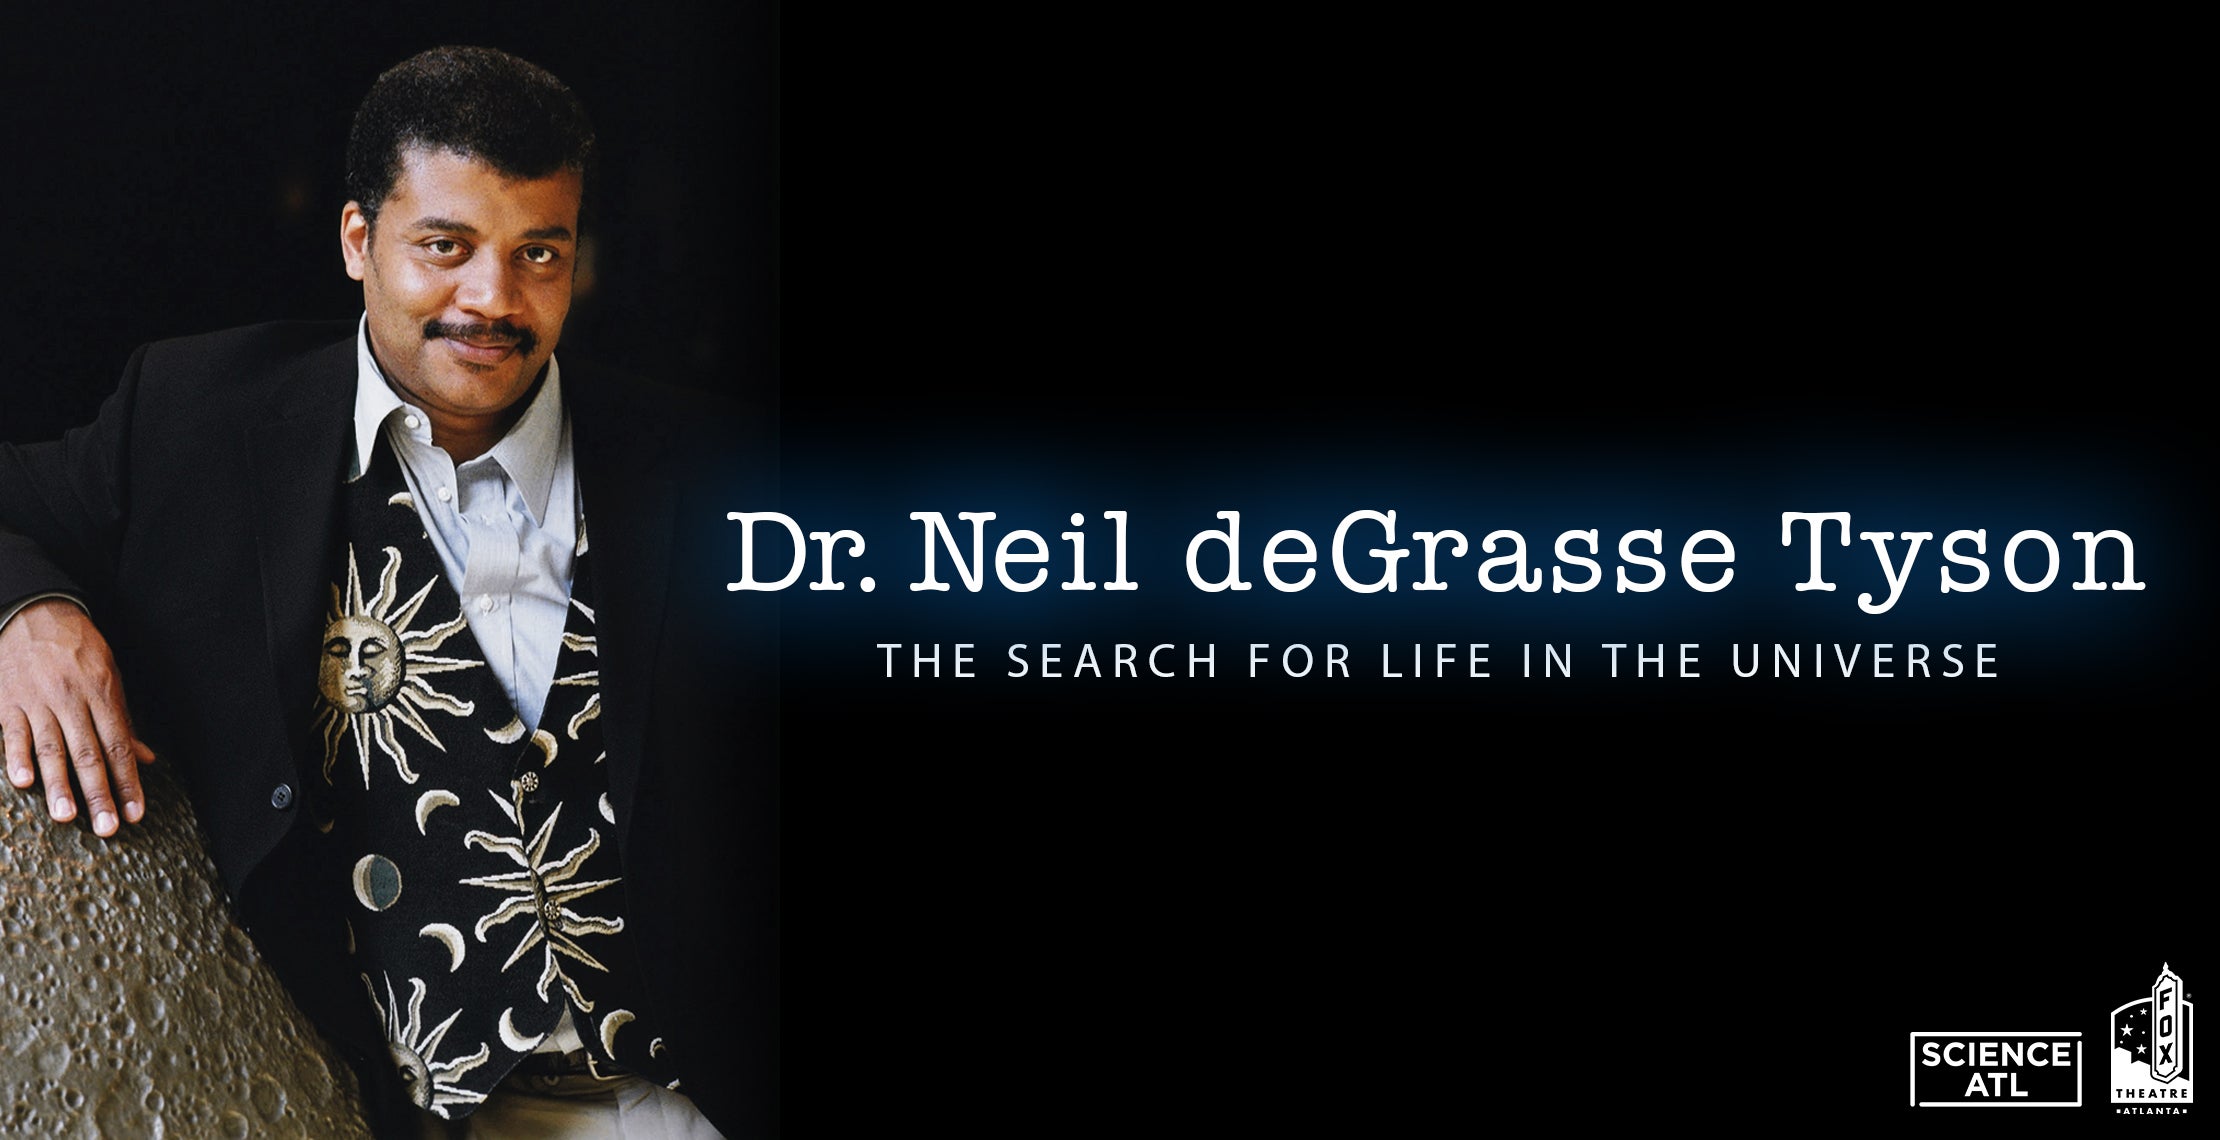 Neil deGrasse Tyson: The Search for Life in the Universe